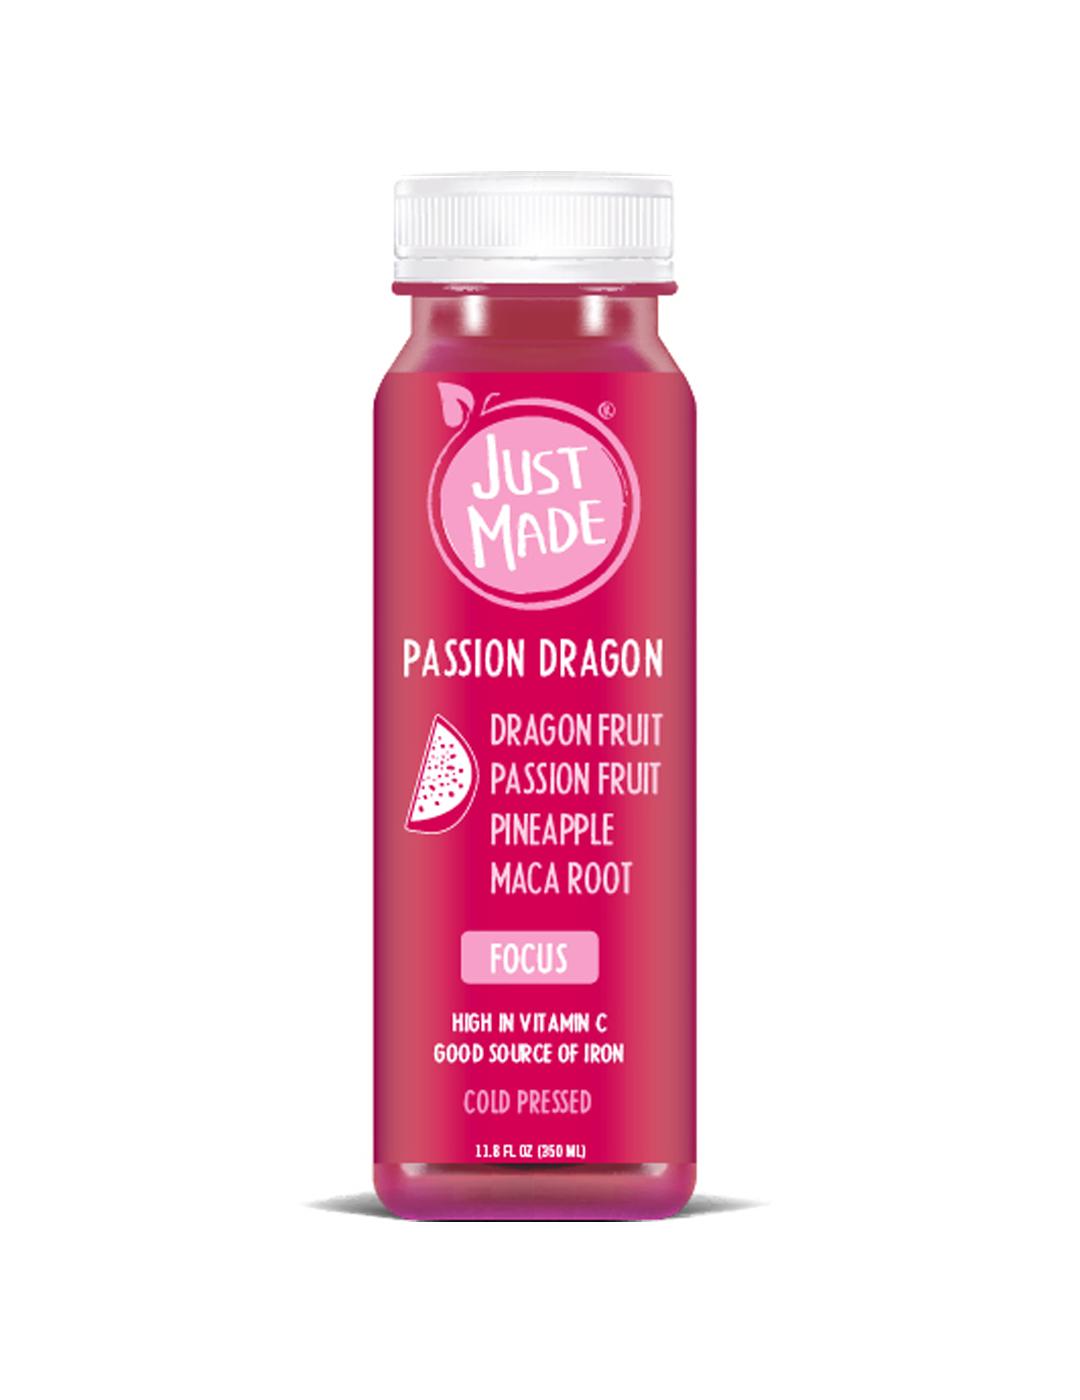 Just Made Passion Dragon Focus Cold-Pressed Juice; image 1 of 2